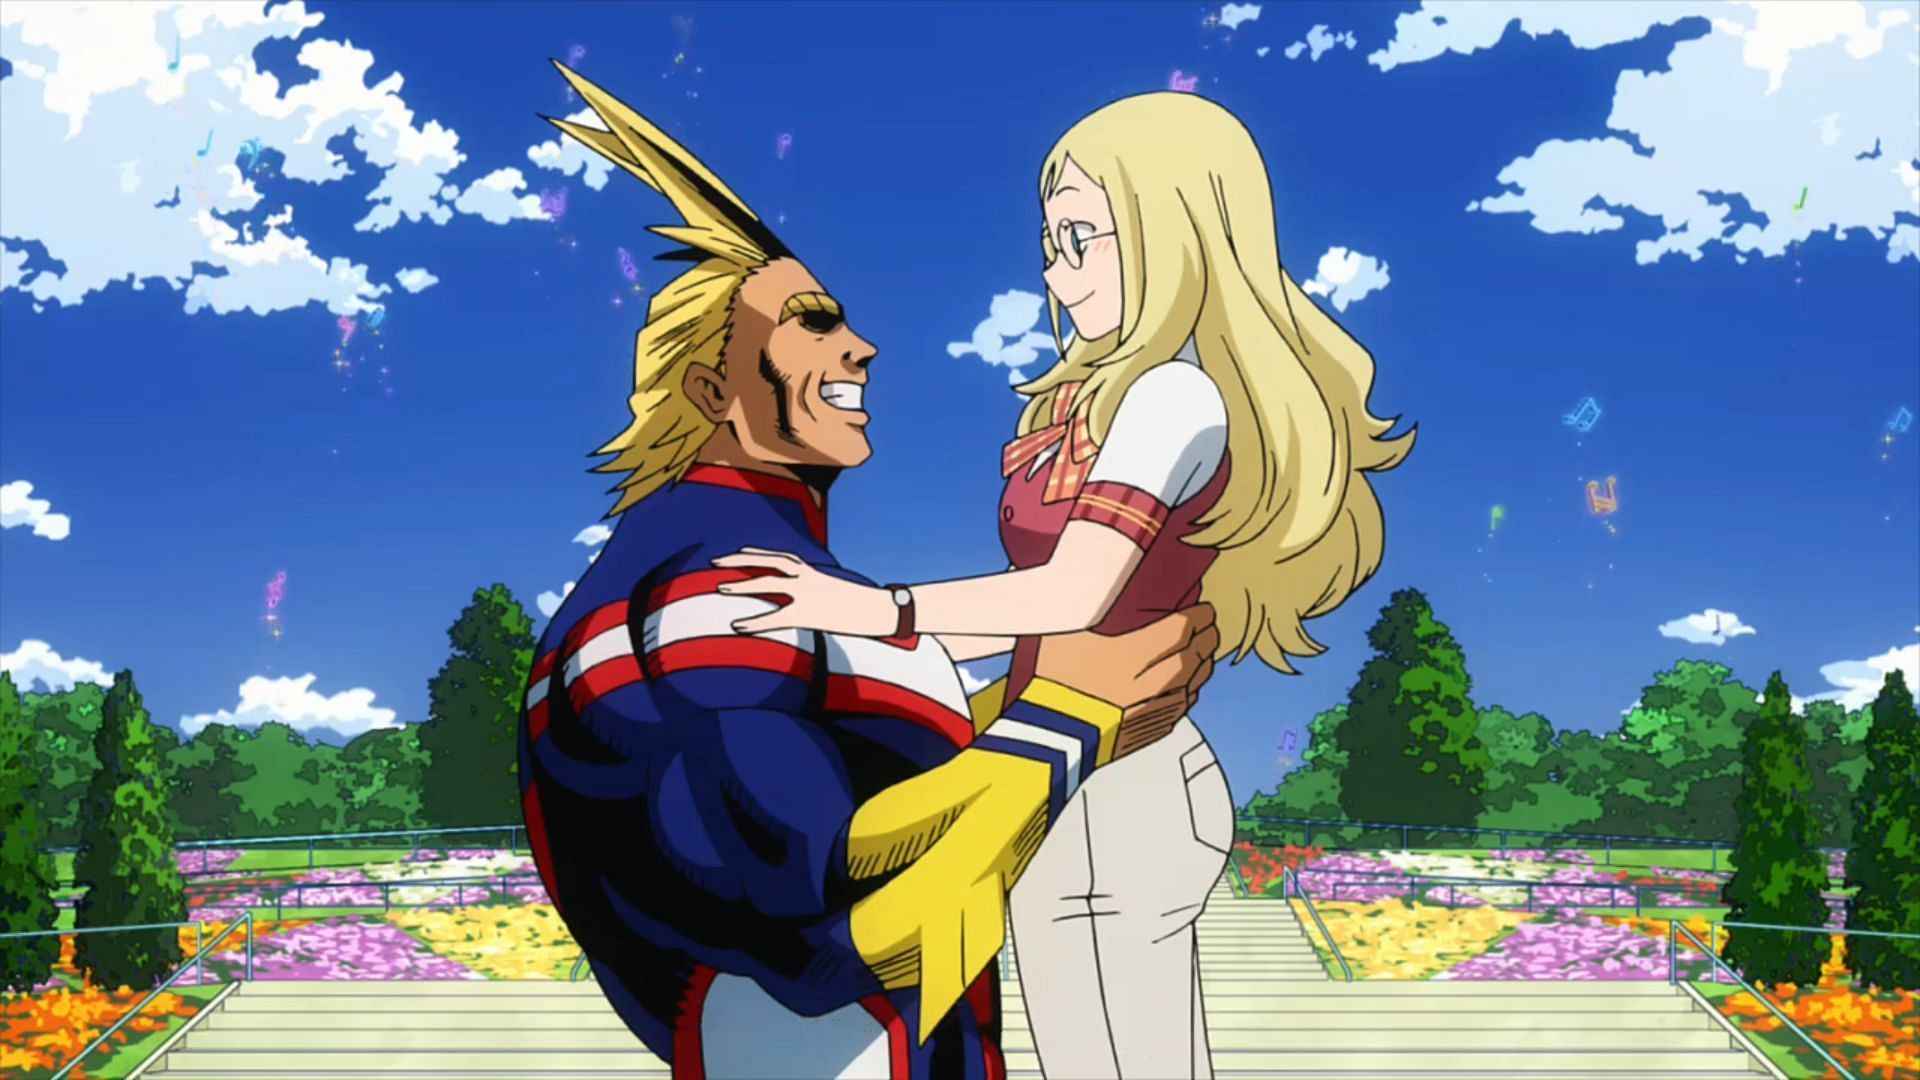 All Might (left) and Melissa Shields (right) as seen in the series&#039; anime films (Image via Studio BONES)